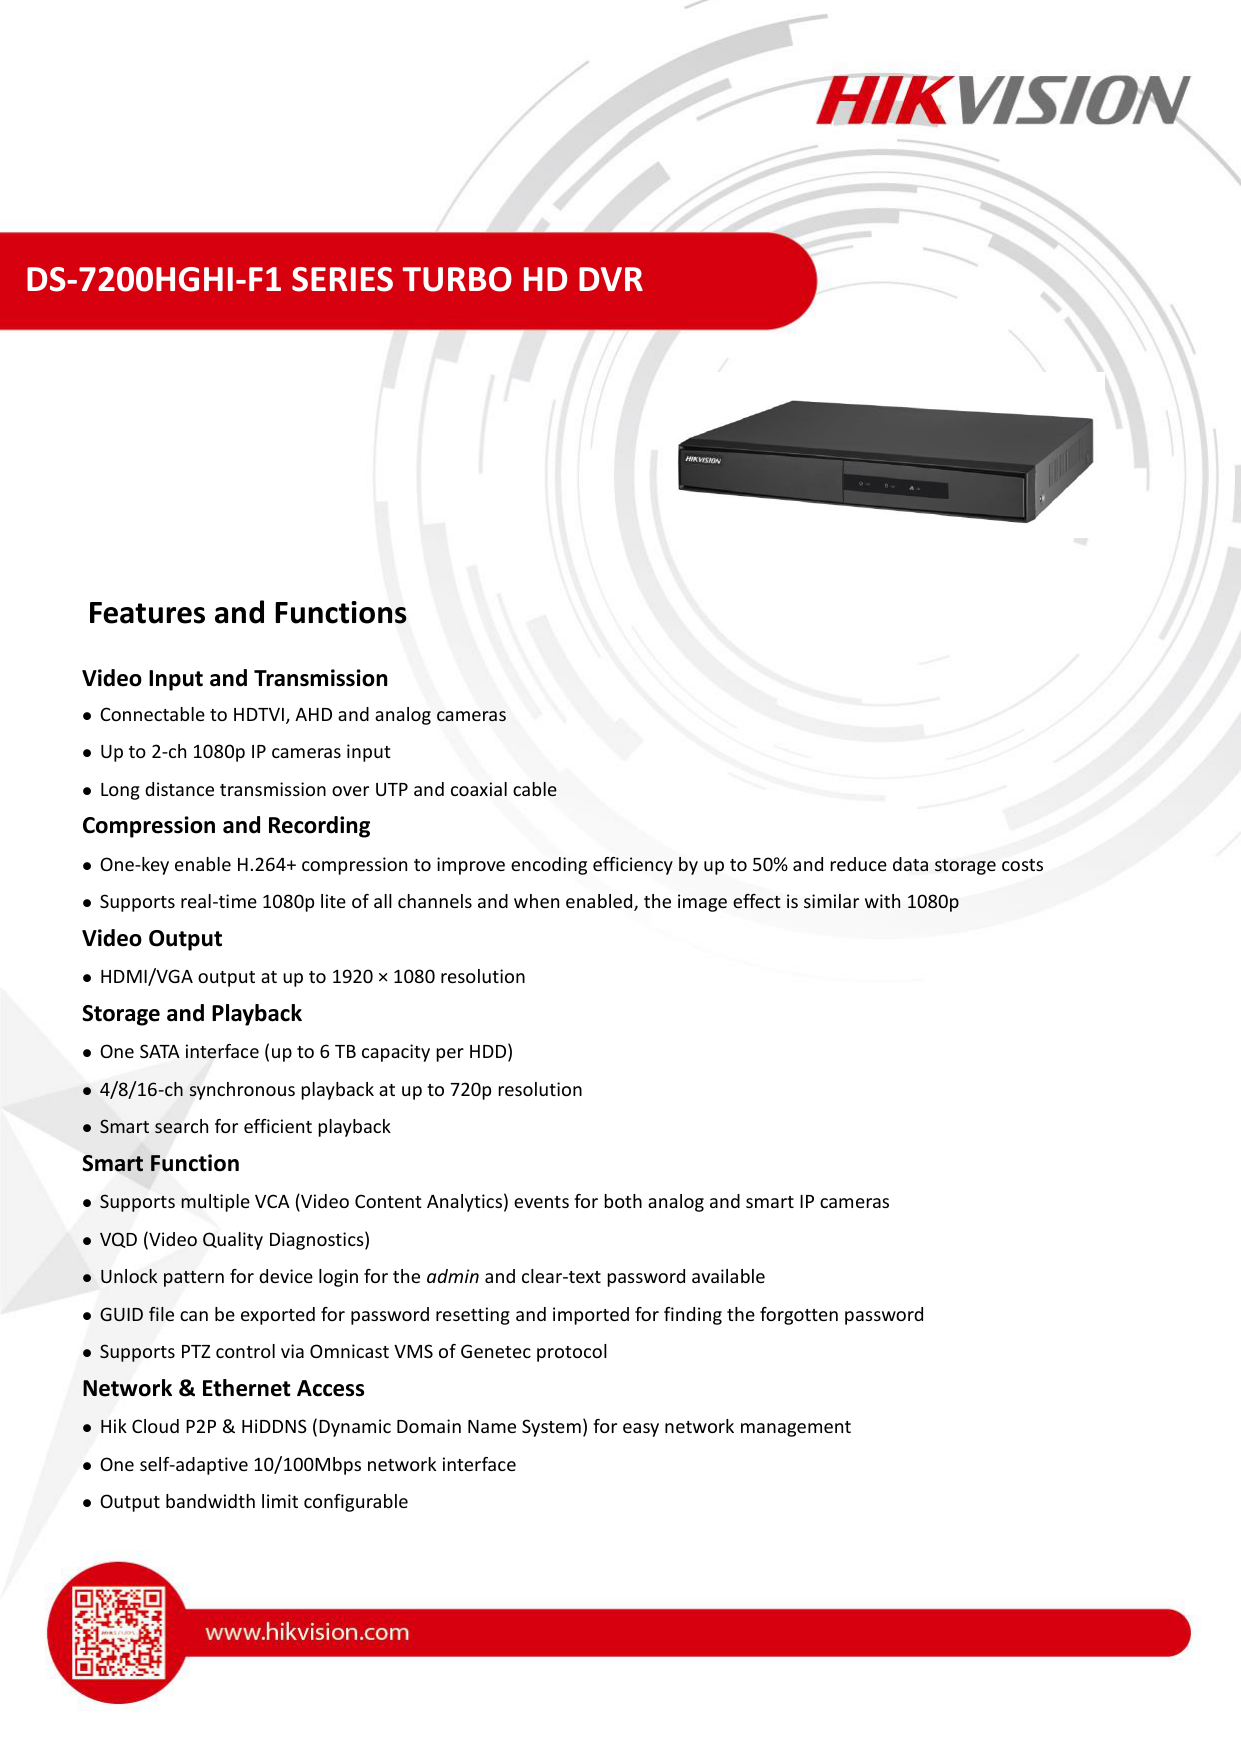 Hikvision Ds 78hghi F1 A Turbo Hd Dvr Hd Tvi 7p Entry 1 Hdd 8 Kanale Datasheet Manualzz